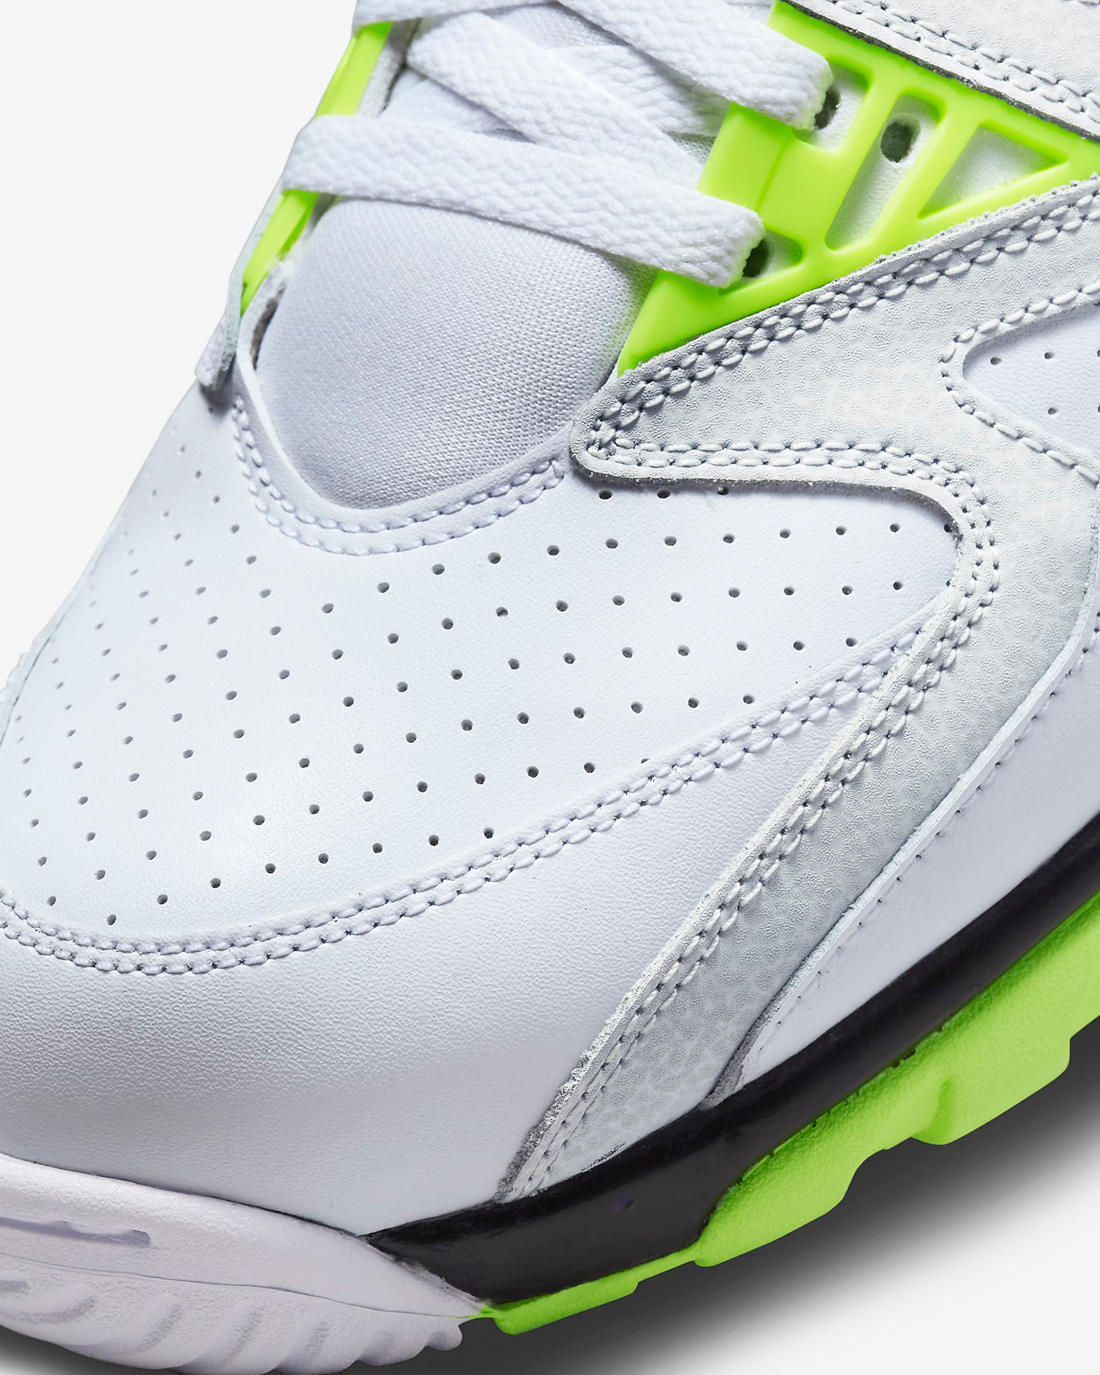 Nike-Air-Cross-Trainer-3-Low-White-Racer-Blue-Volt-Release-Date-Info-7